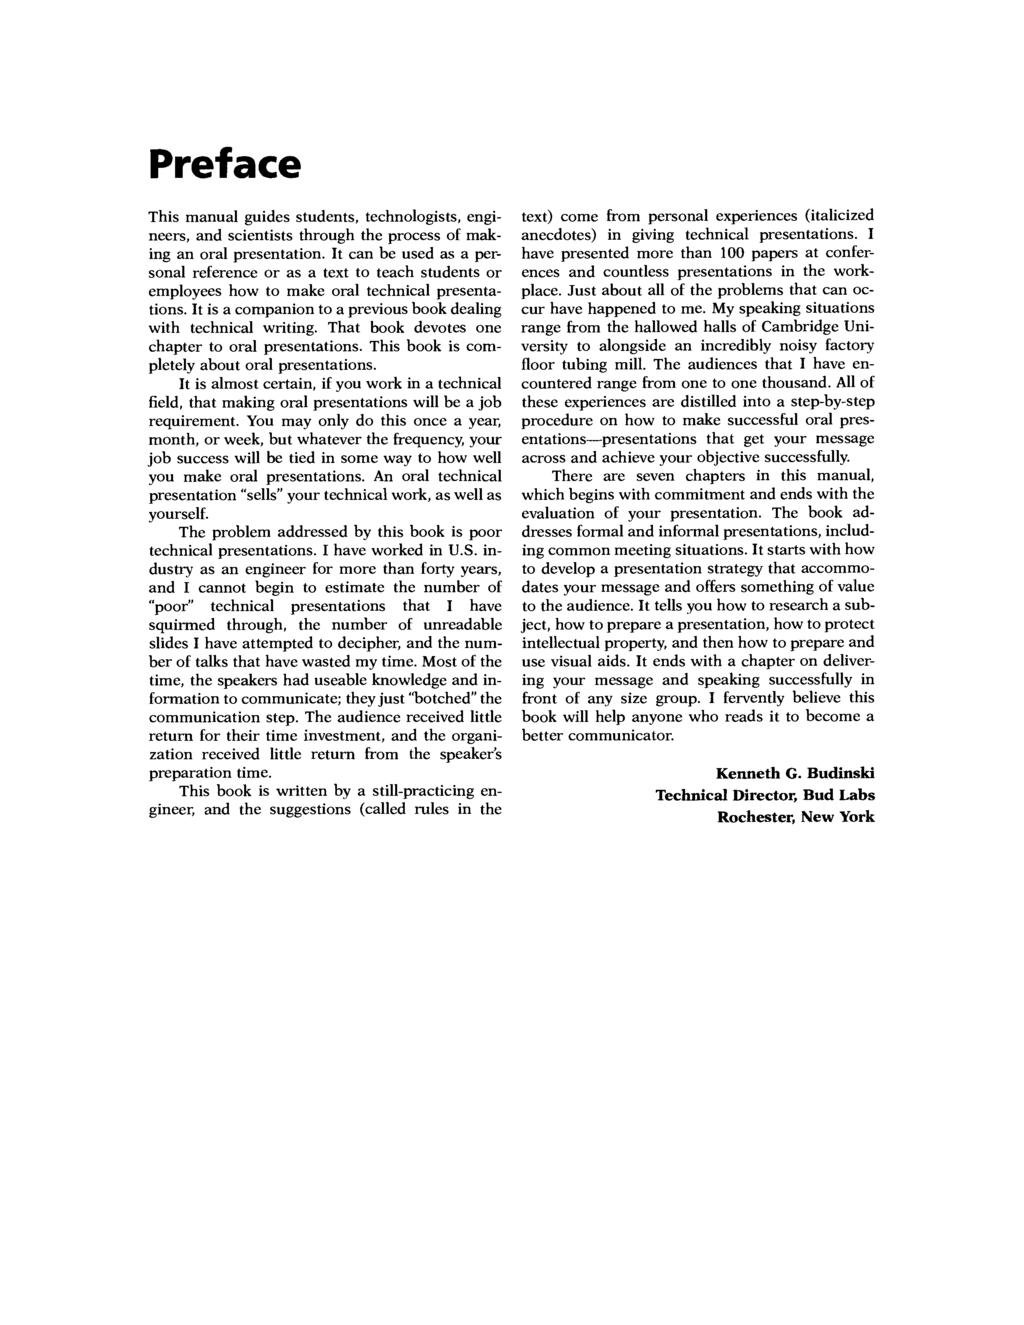 Preface This manual guides students, technologists, engineers, and scientists through the process of making an oral presentation.